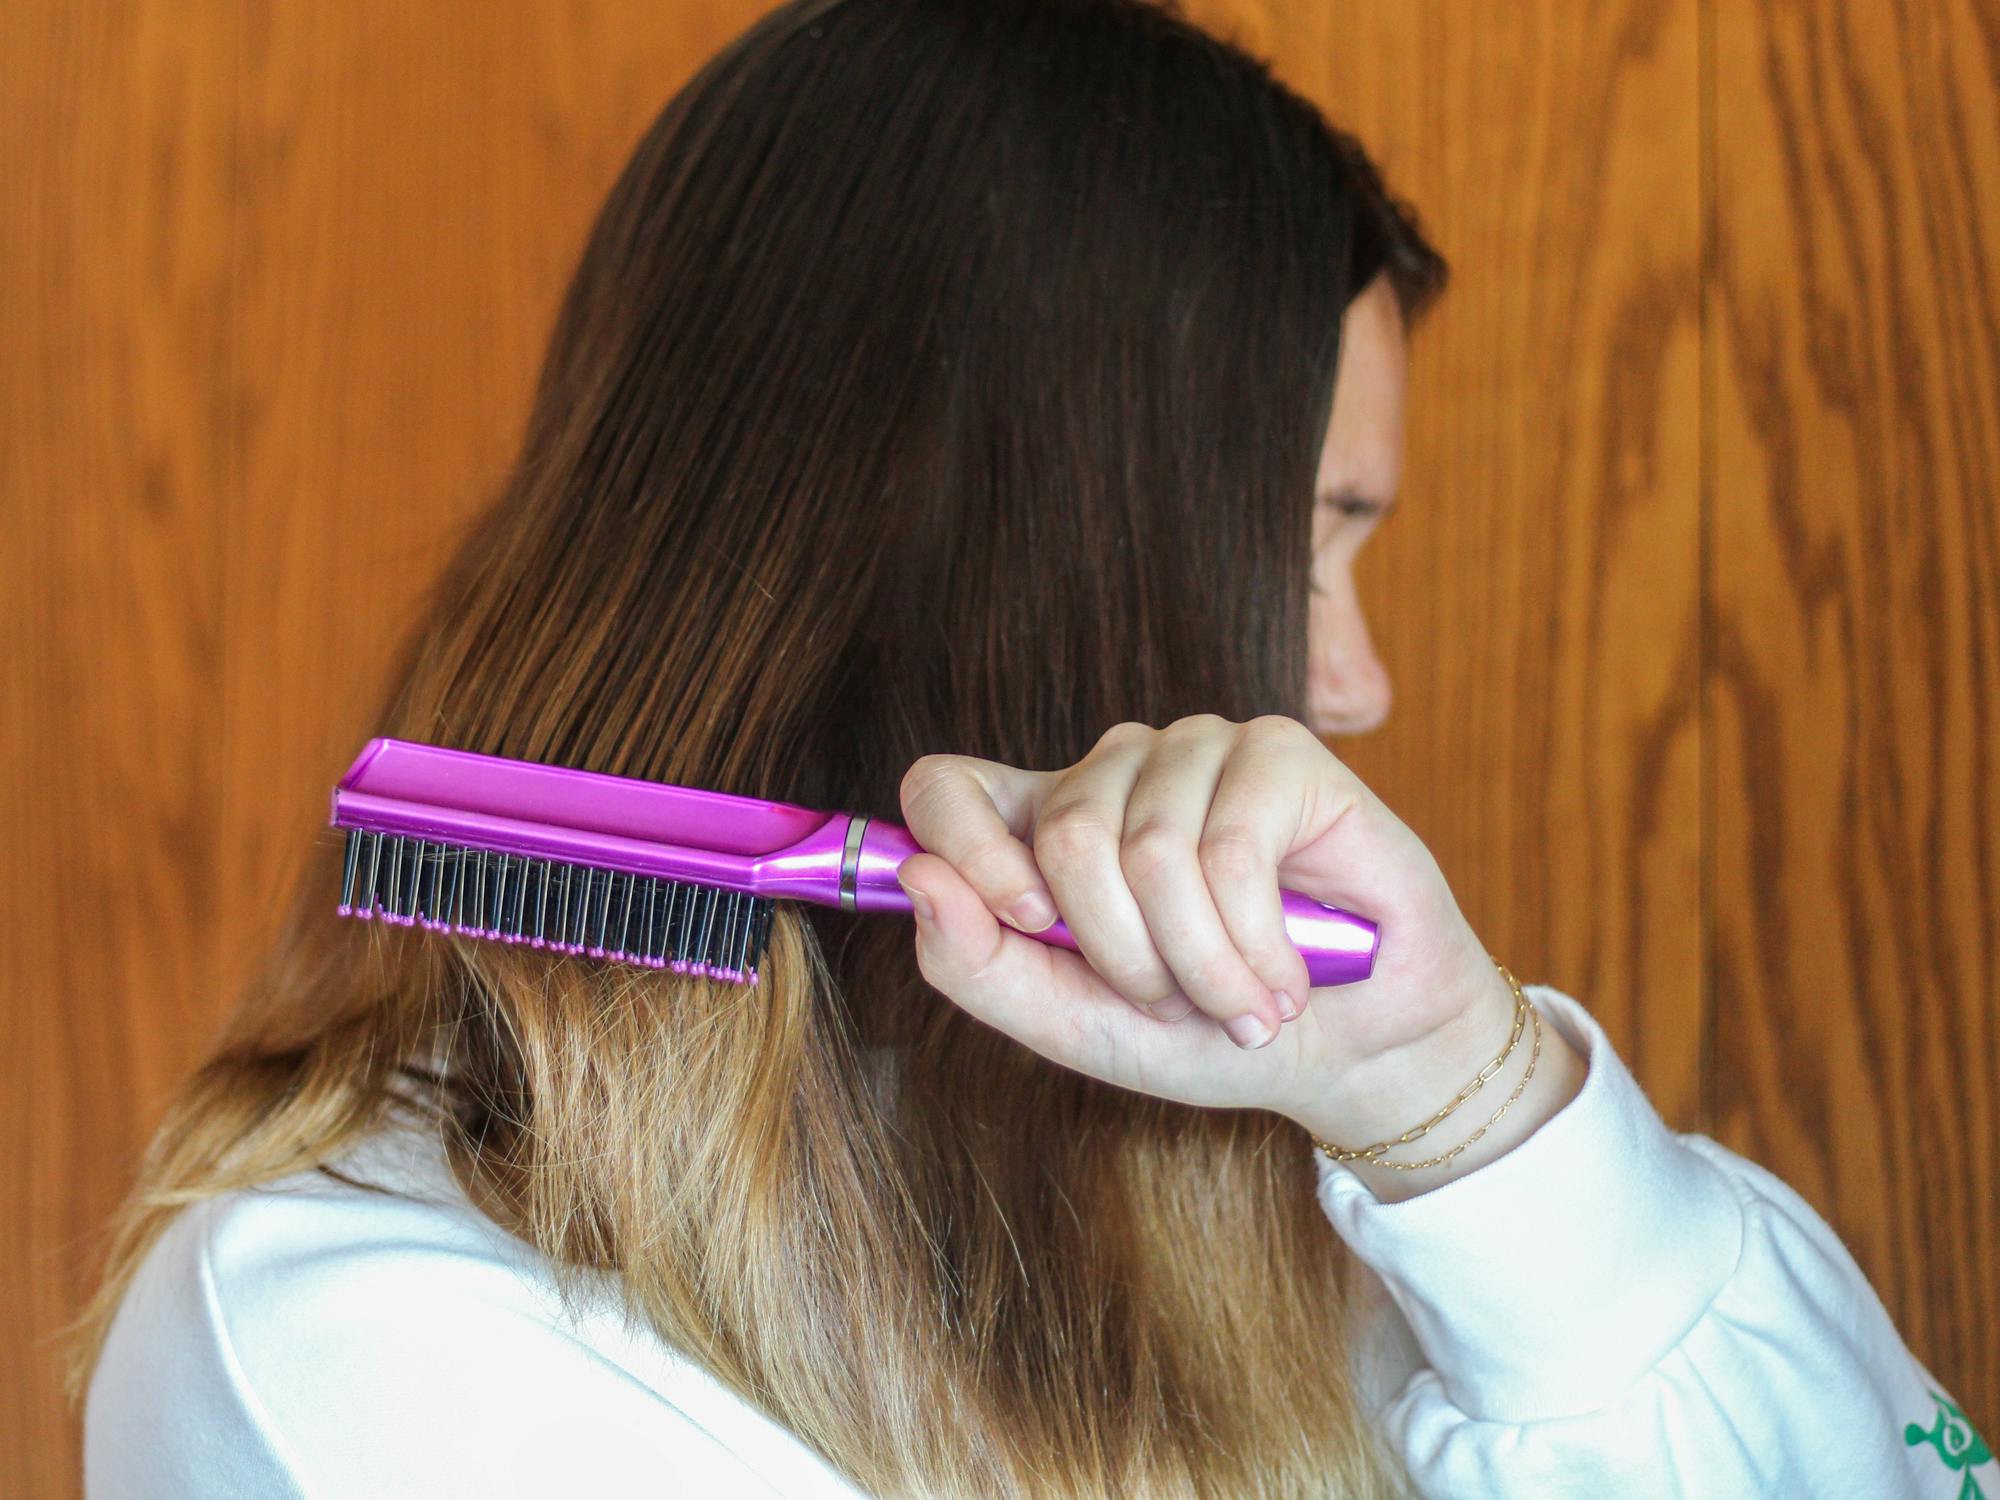 person brushing their hair with a hairbrush